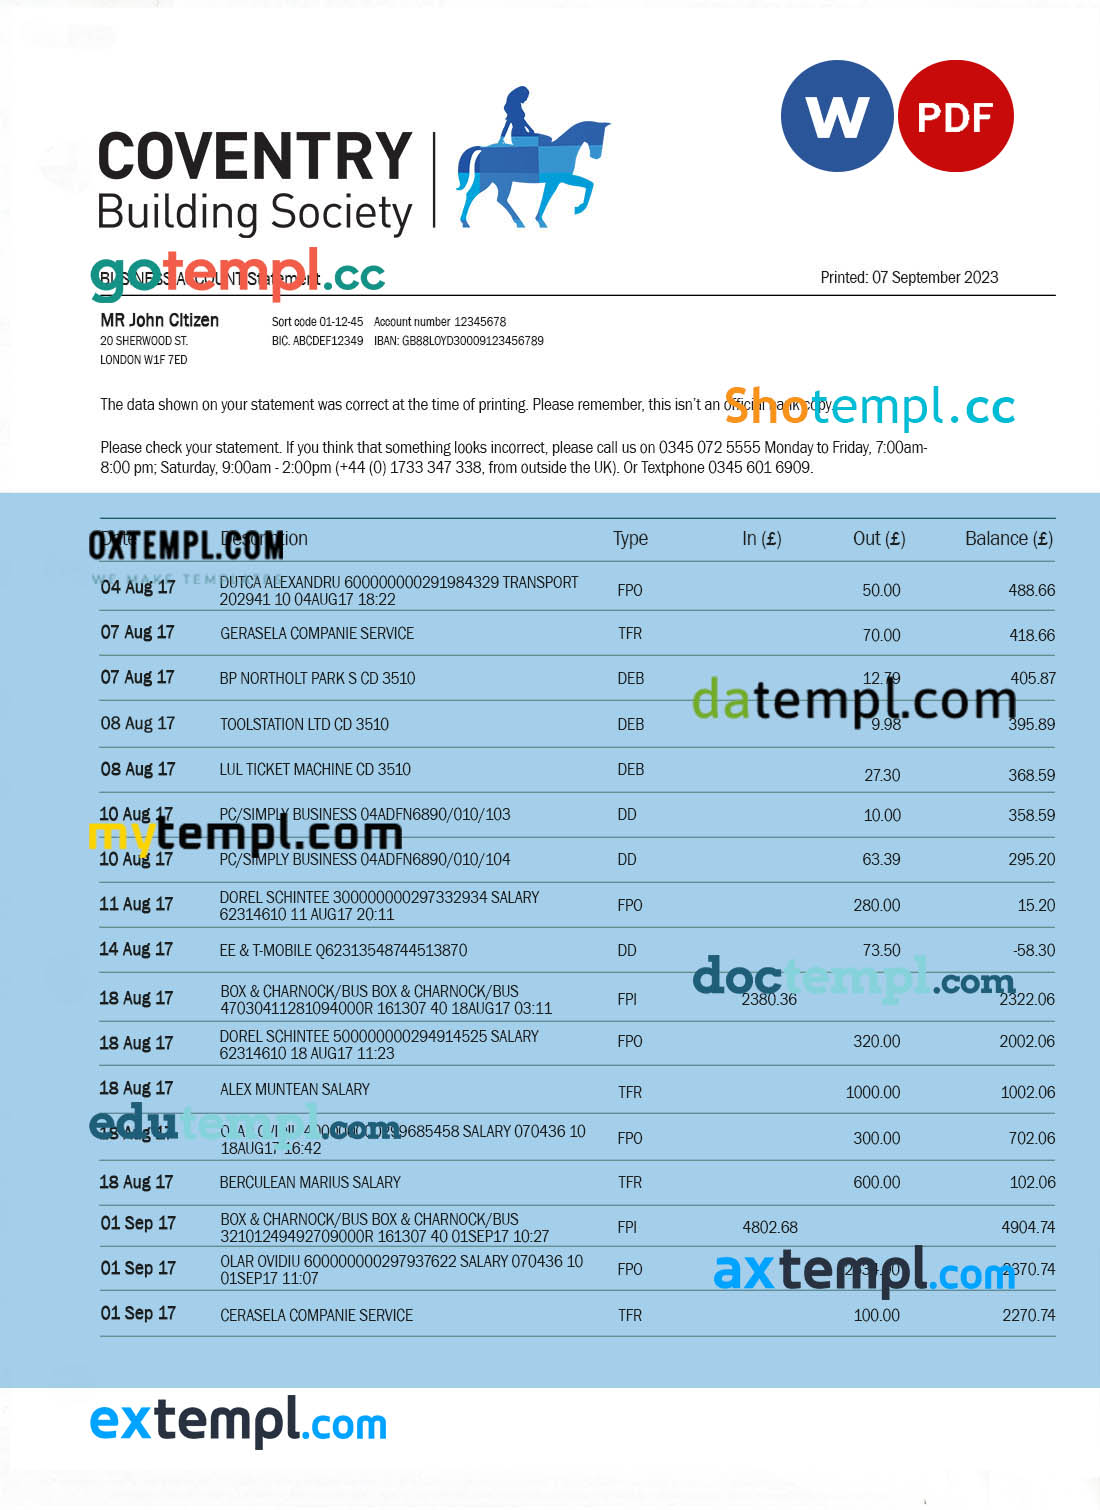 USA Discover bank statement template in Excel and PDF (.xls and .pdf file) format